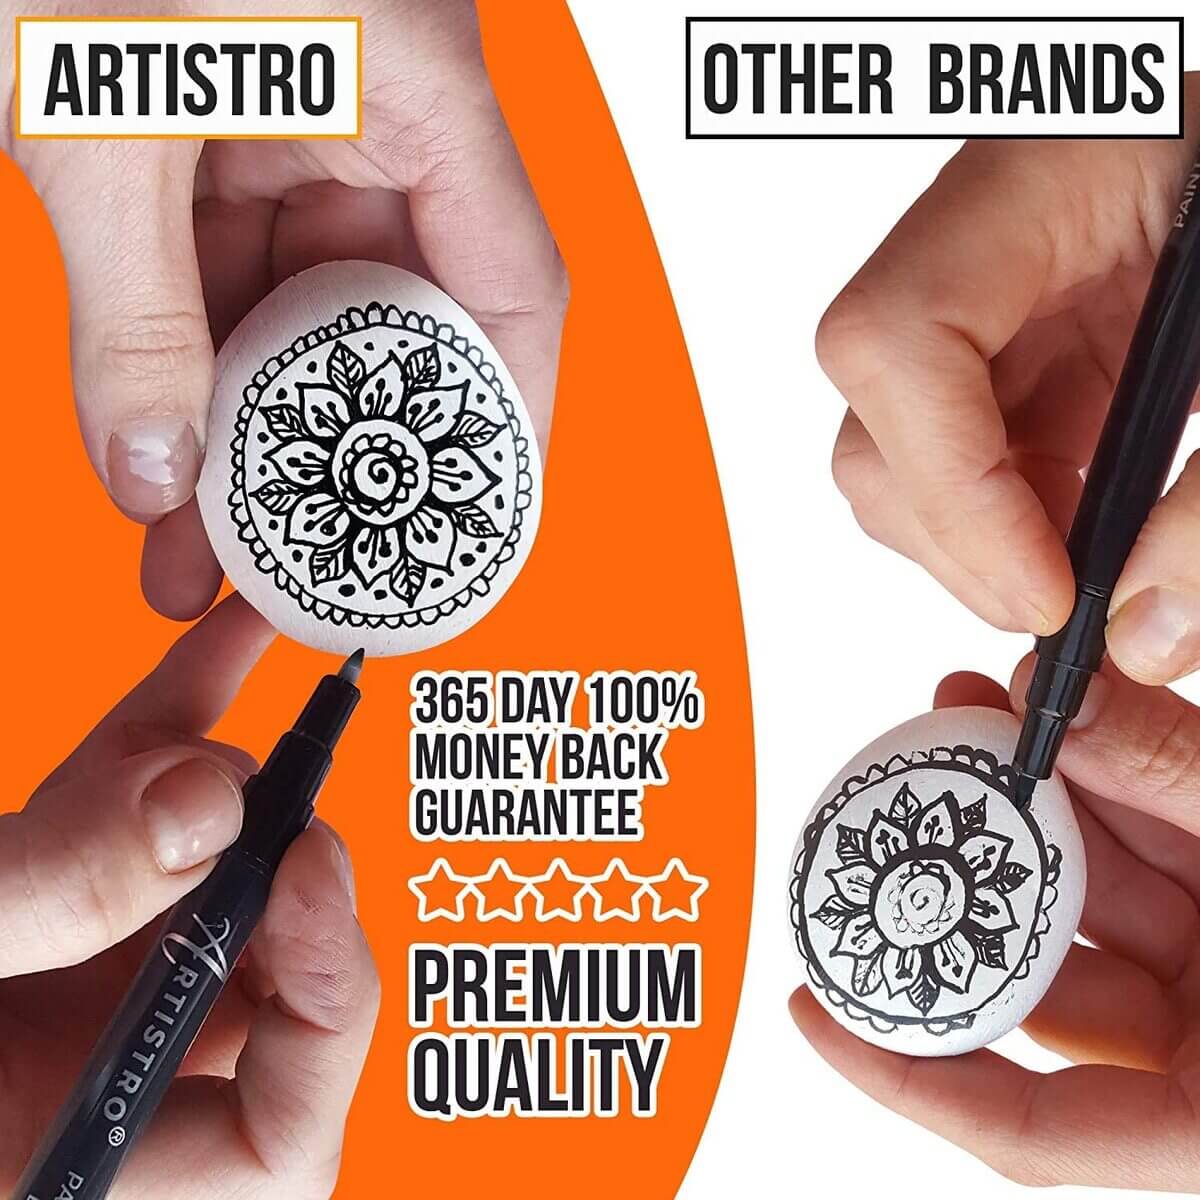 Black Paint Pens for Rock Painting, Stone, Ceramic, Glass. Extra Fine Point  Tip, Set of 5 Black Acrylic Paint Markers. 